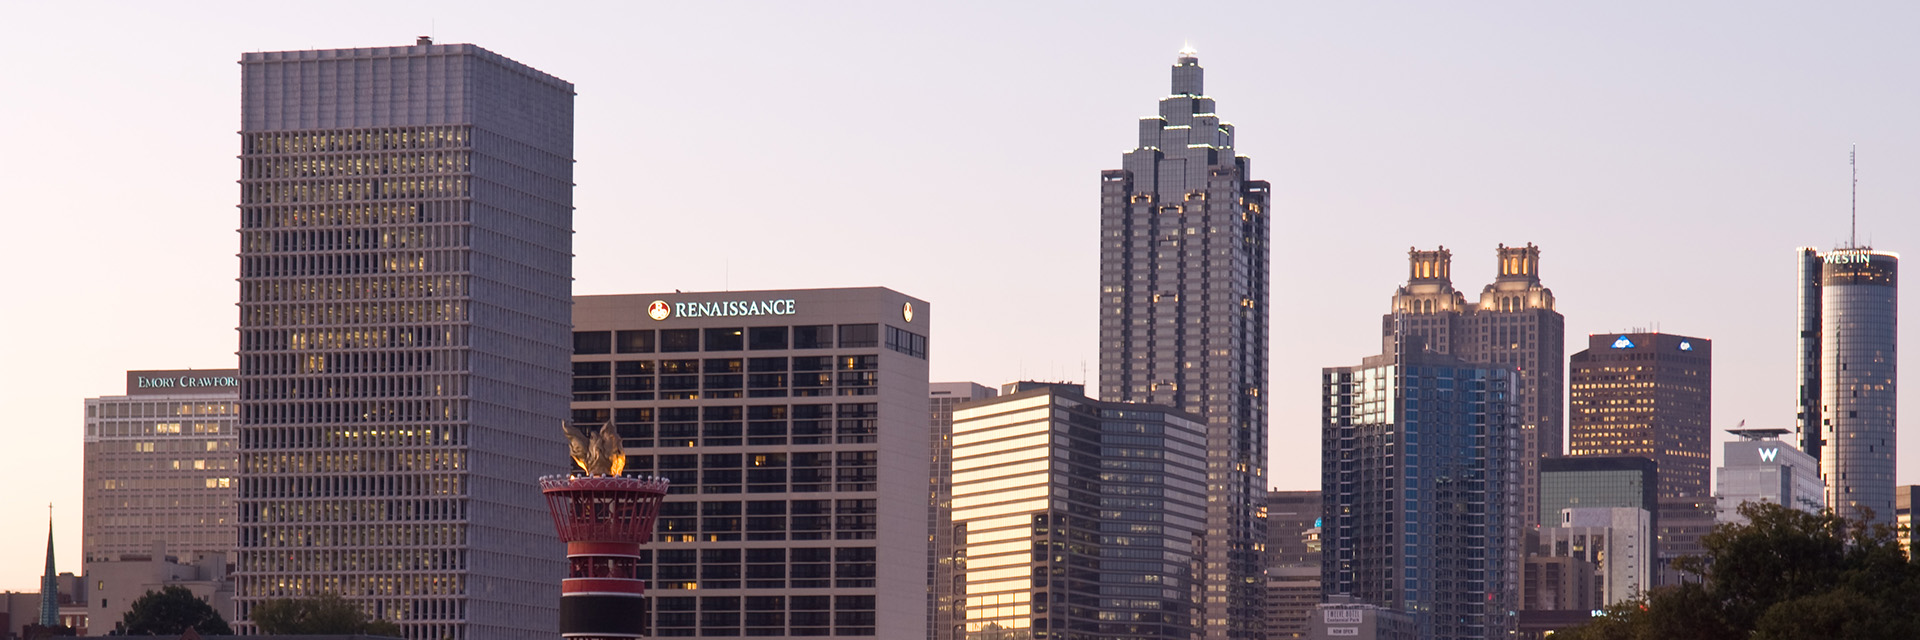 Atlanta Skyline of Downtown as the sunsets. Image provided by Georgia Tech.